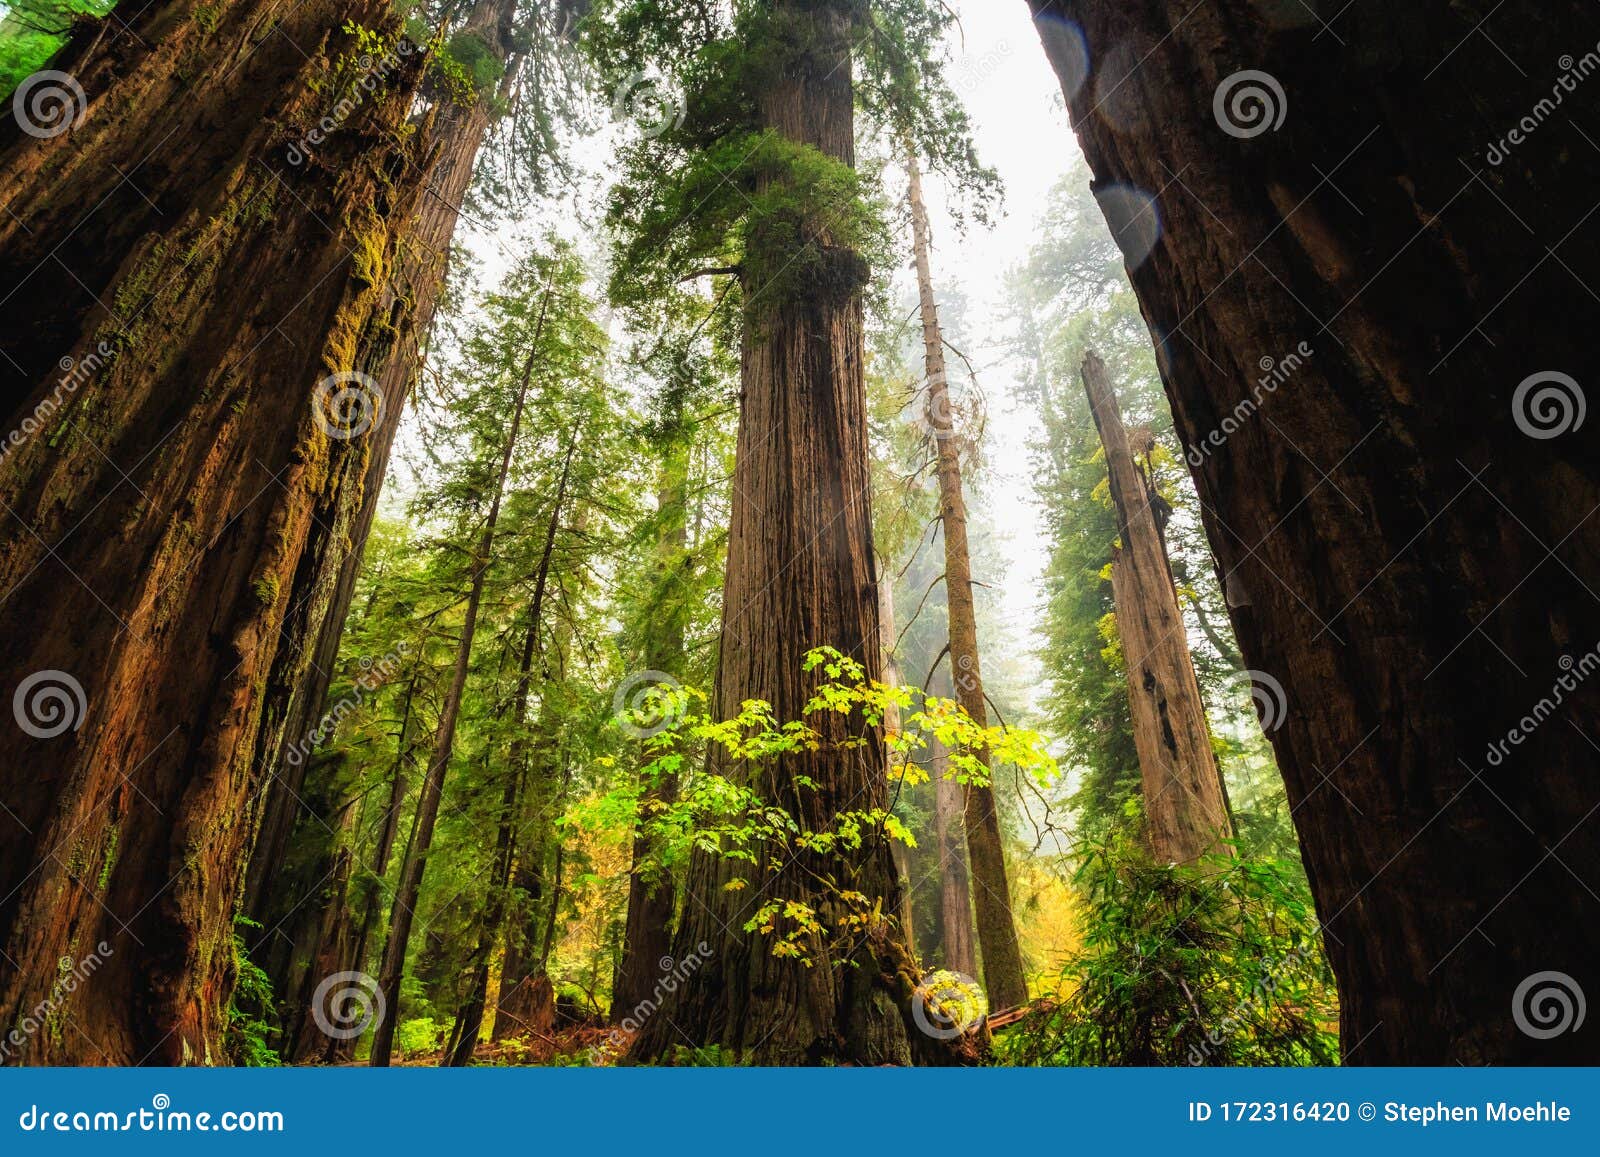 views in the redwood forest, redwoods national & state parks california